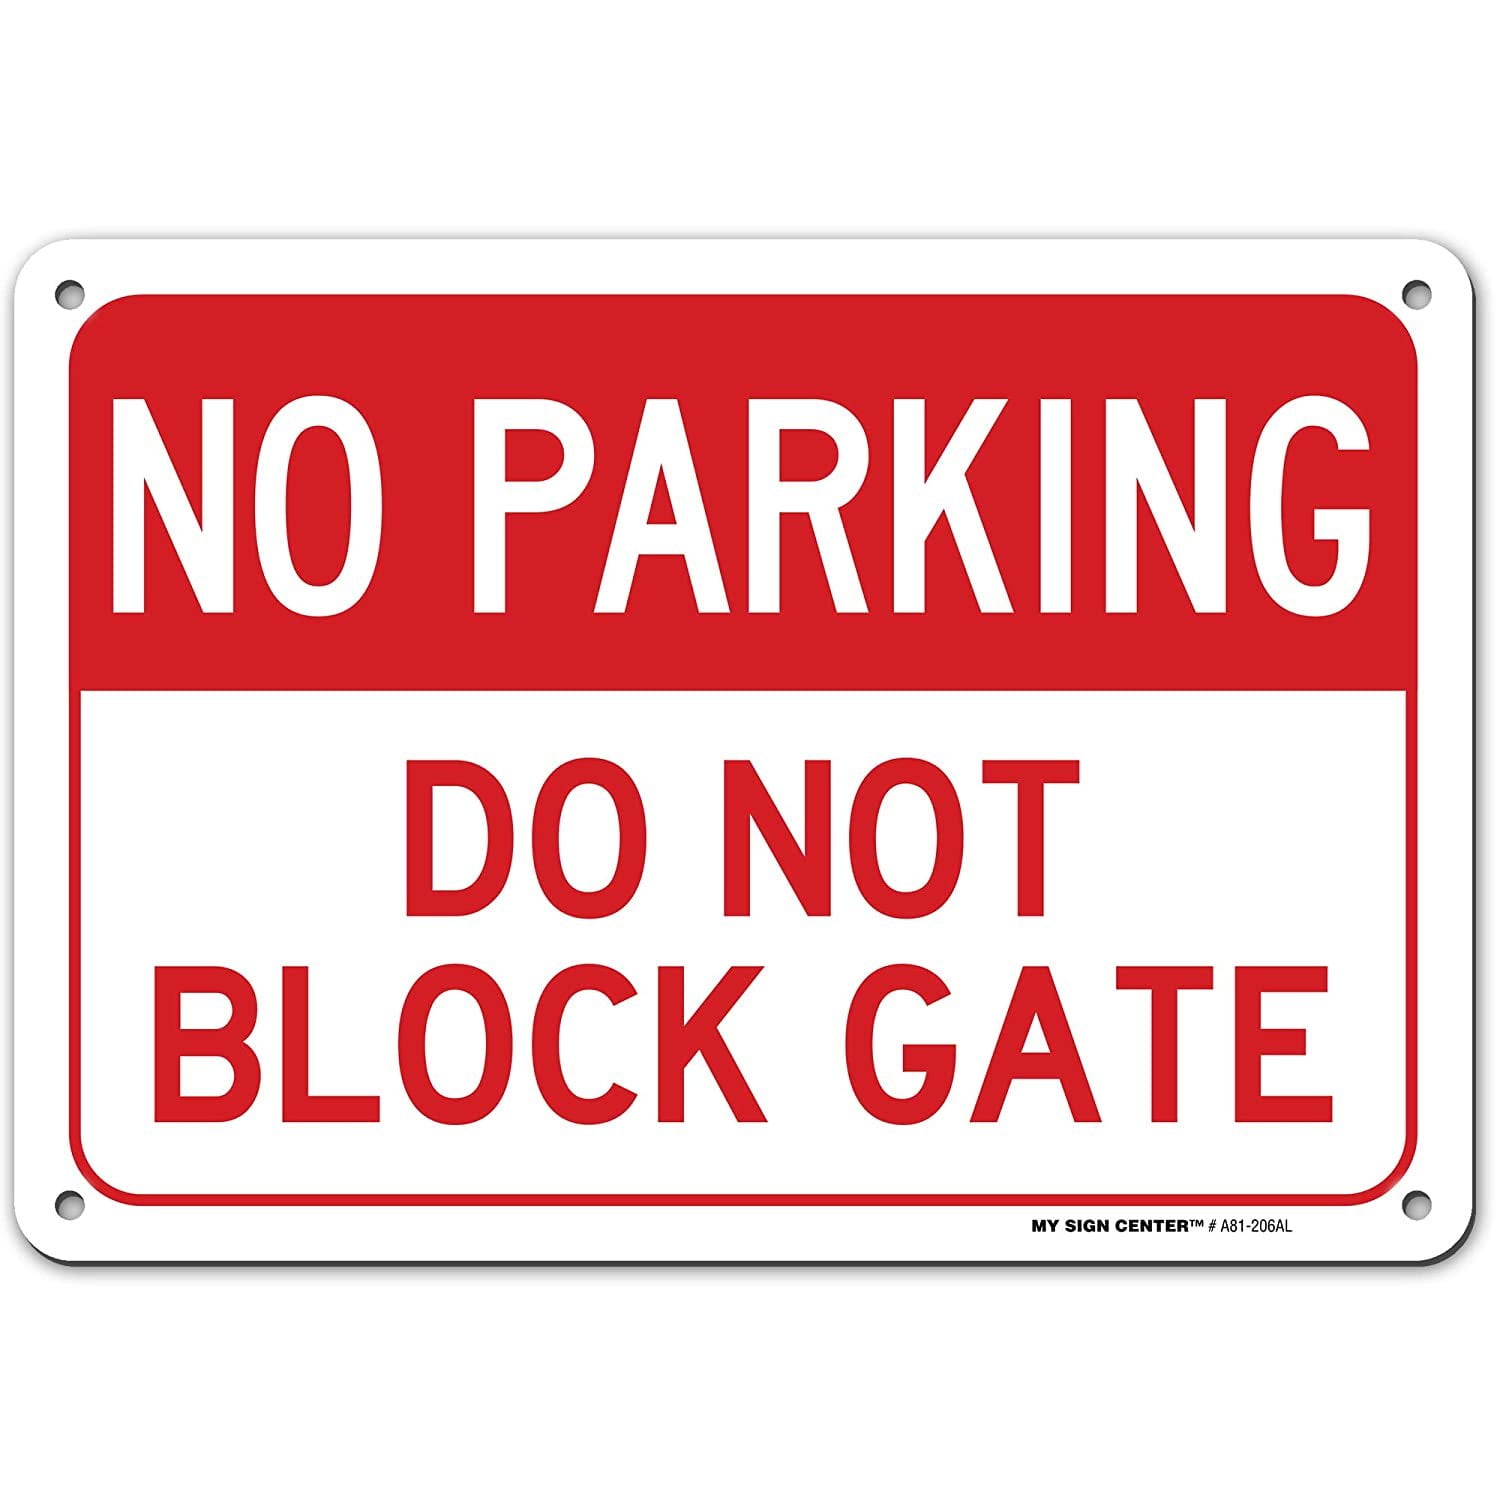 Do Not Block Driveway 24 Hour Access Required PLASTIC No Parking Sign 200x300mm 